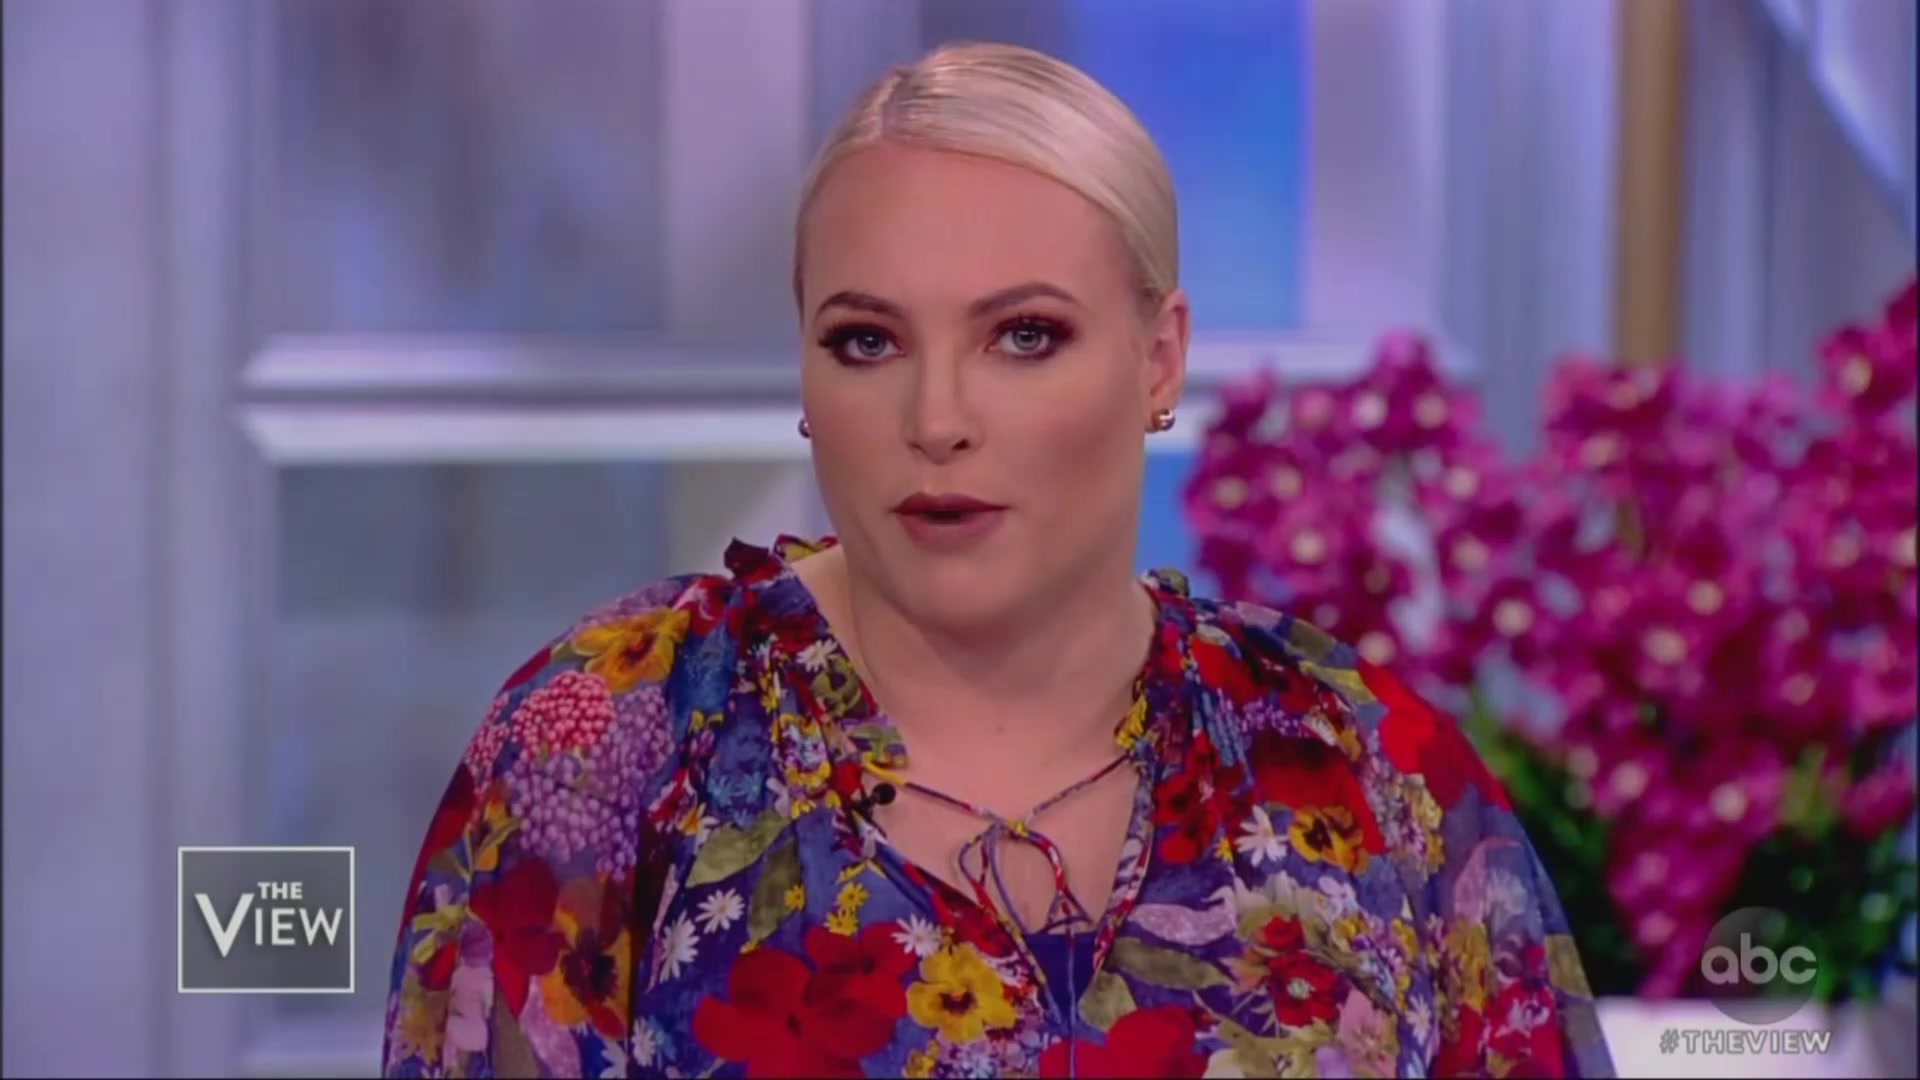 Meghan McCain Complains That Trump’s Racism Takes Away Her ‘Agency’ to Criticize Ilhan Omar